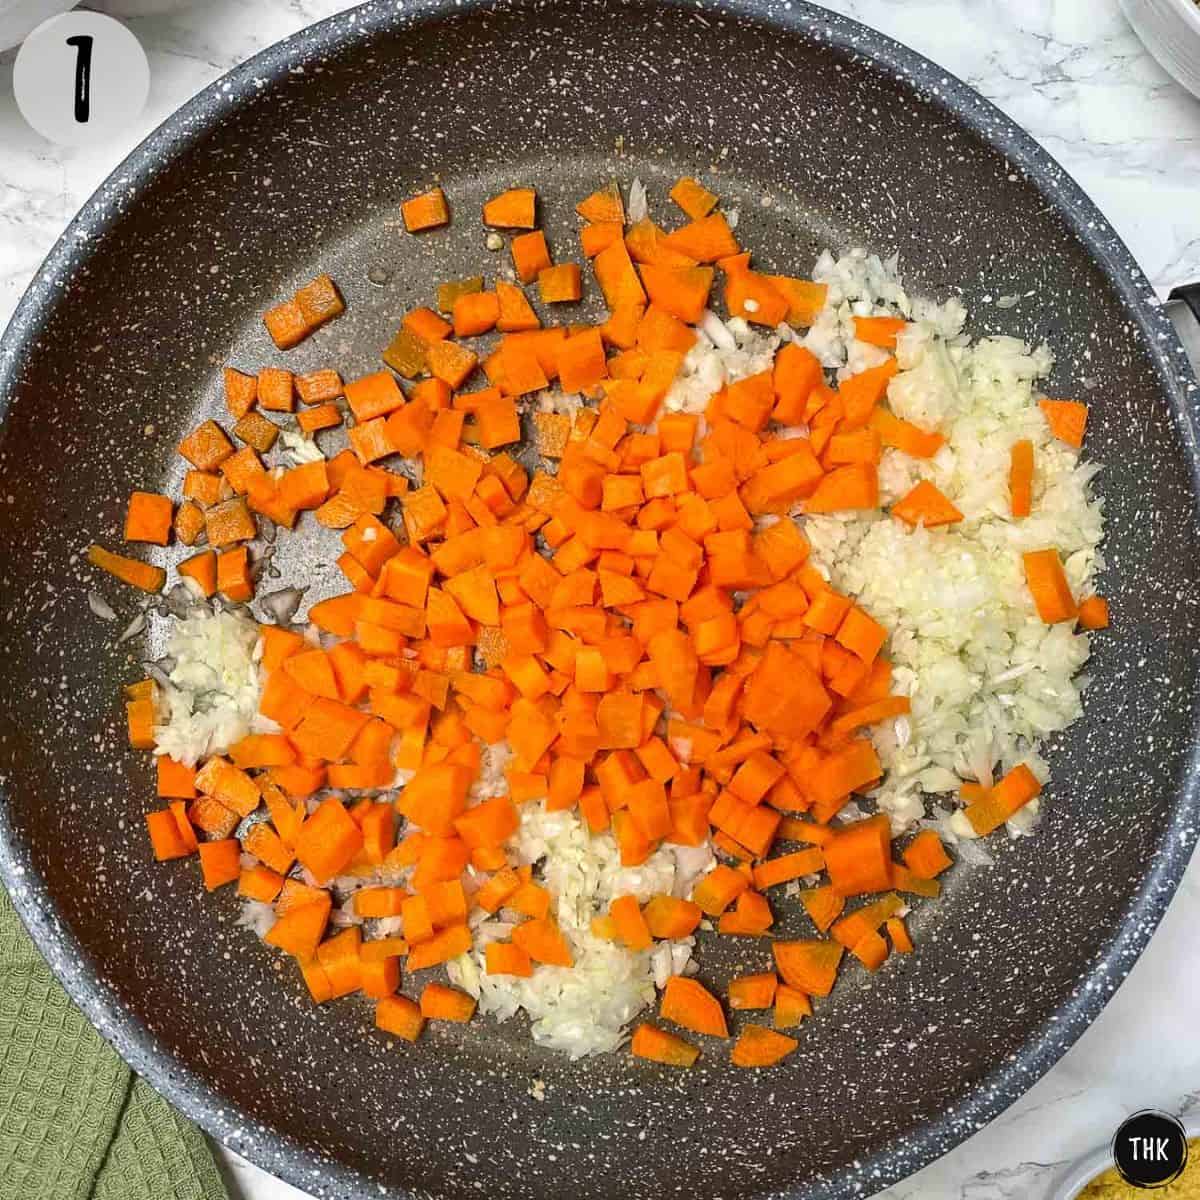 Diced onion and carrots in frying pan.